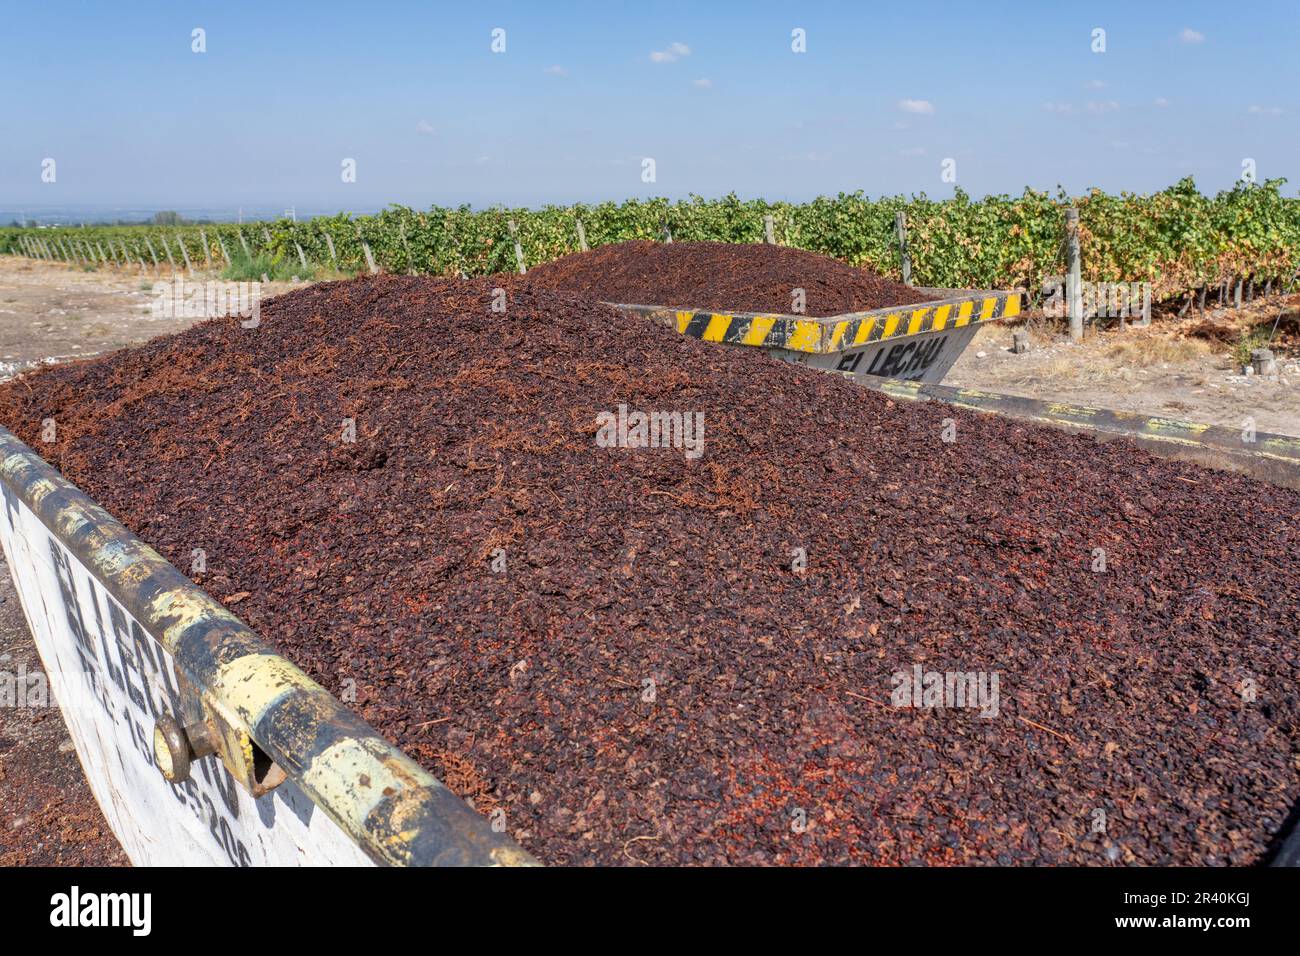 Waste bins of discarded grape skins by the destemmer at the Ferrer Winery in Gualtallary, Tupungato, Valle de Uco,  Argentina. Stock Photo